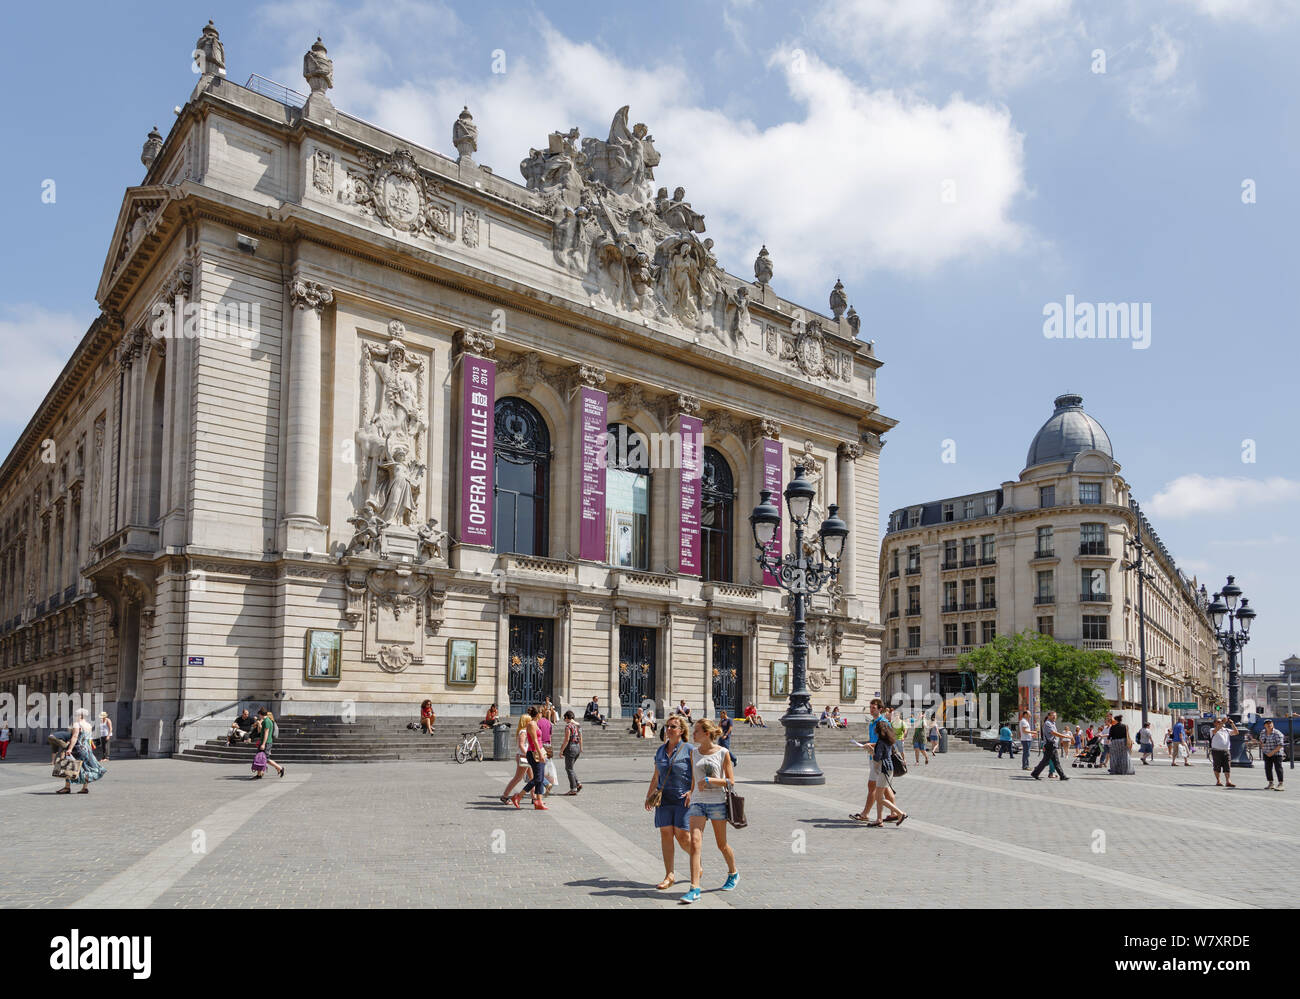 Lille, France - July 20, 2013. Opera de Lille, the Opera House on Place de Theatre, Lille, France Stock Photo